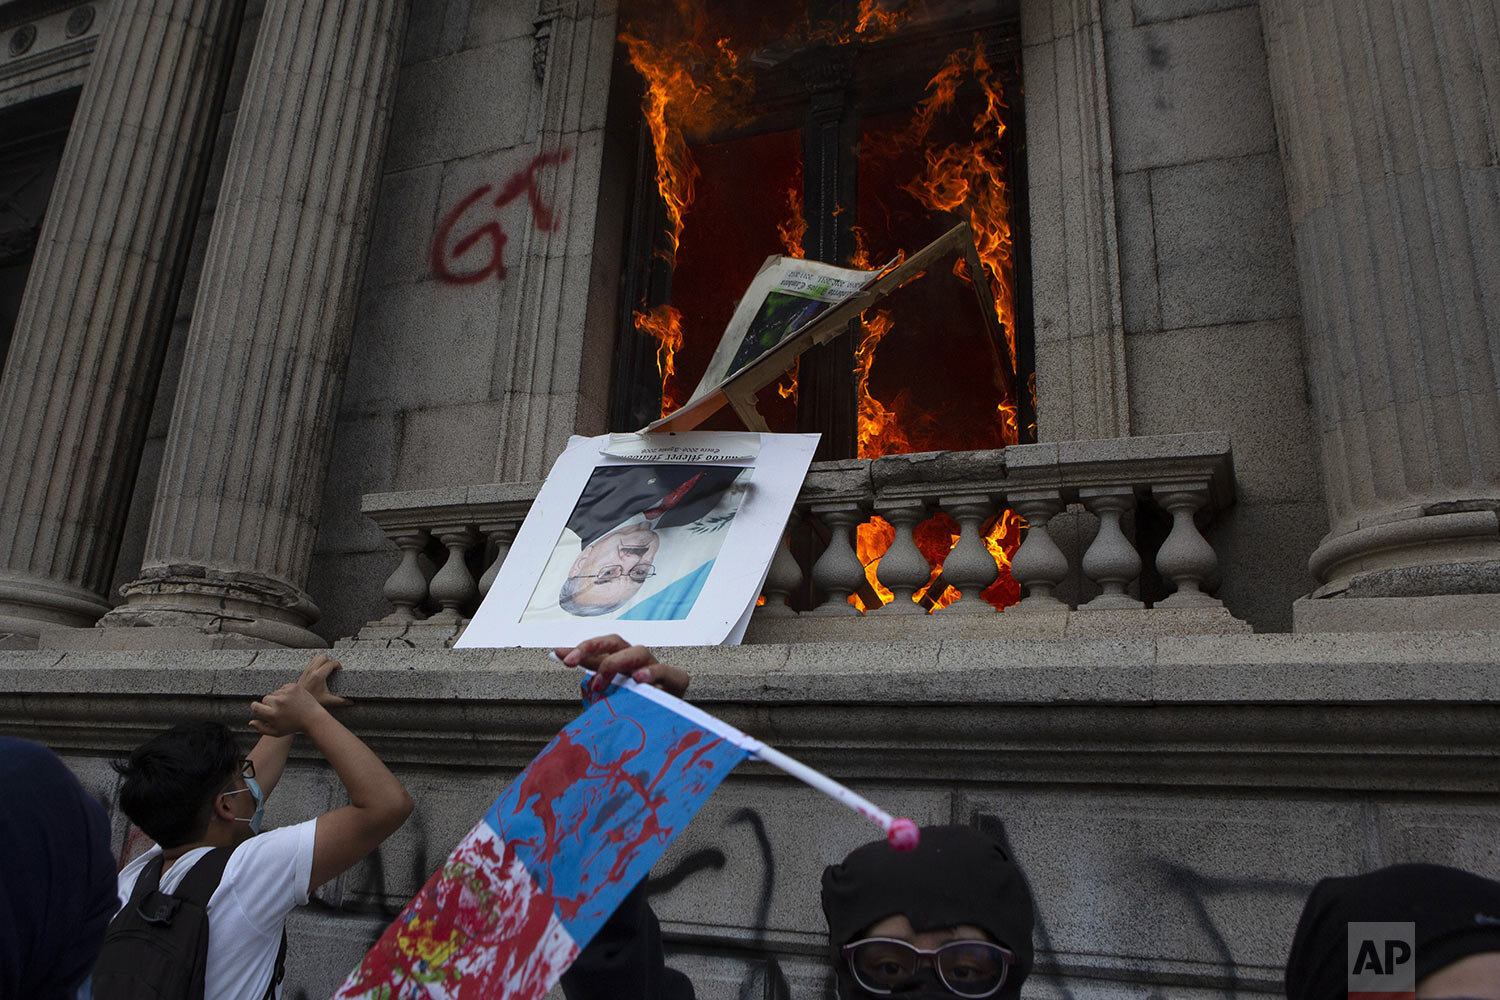  An official photo of former Congress President Eduardo Meyer is thrown out from the Congress building after protesters set a part of the building on fire, in Guatemala City, Saturday, Nov. 21, 2020. (AP Photo/Oliver De Ros) 